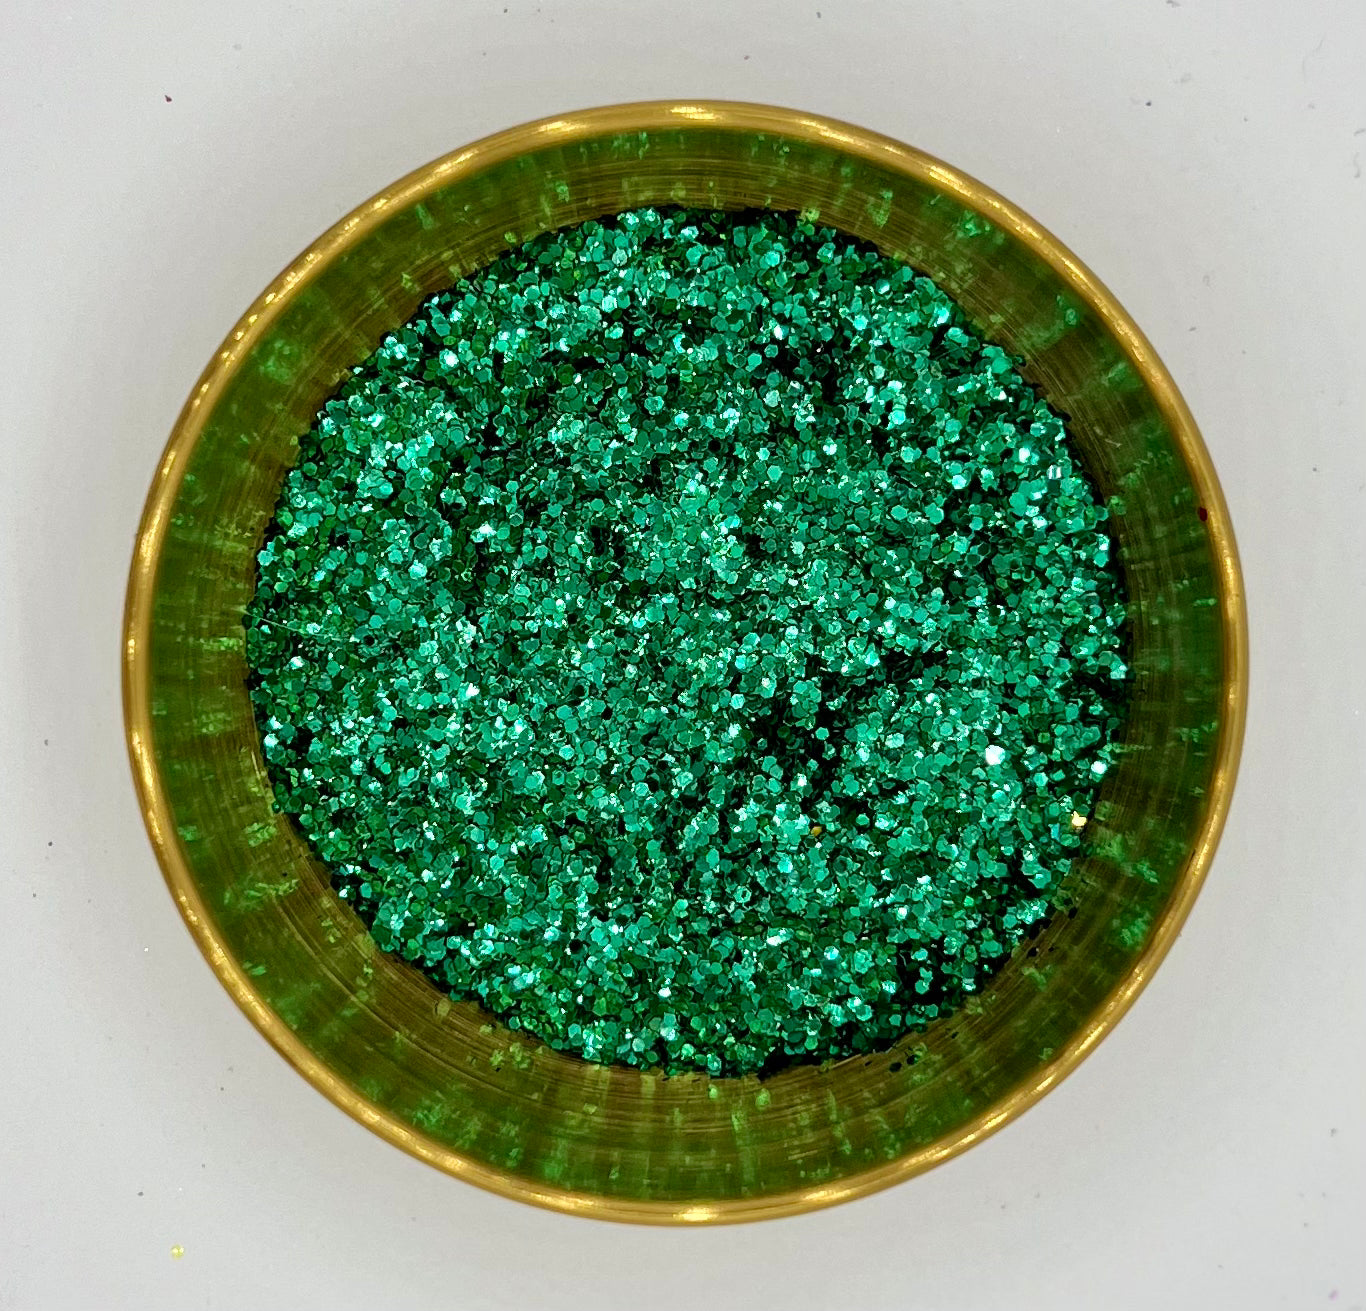 Money for Nothing Extra Chunky Green Biodegradable Glitter